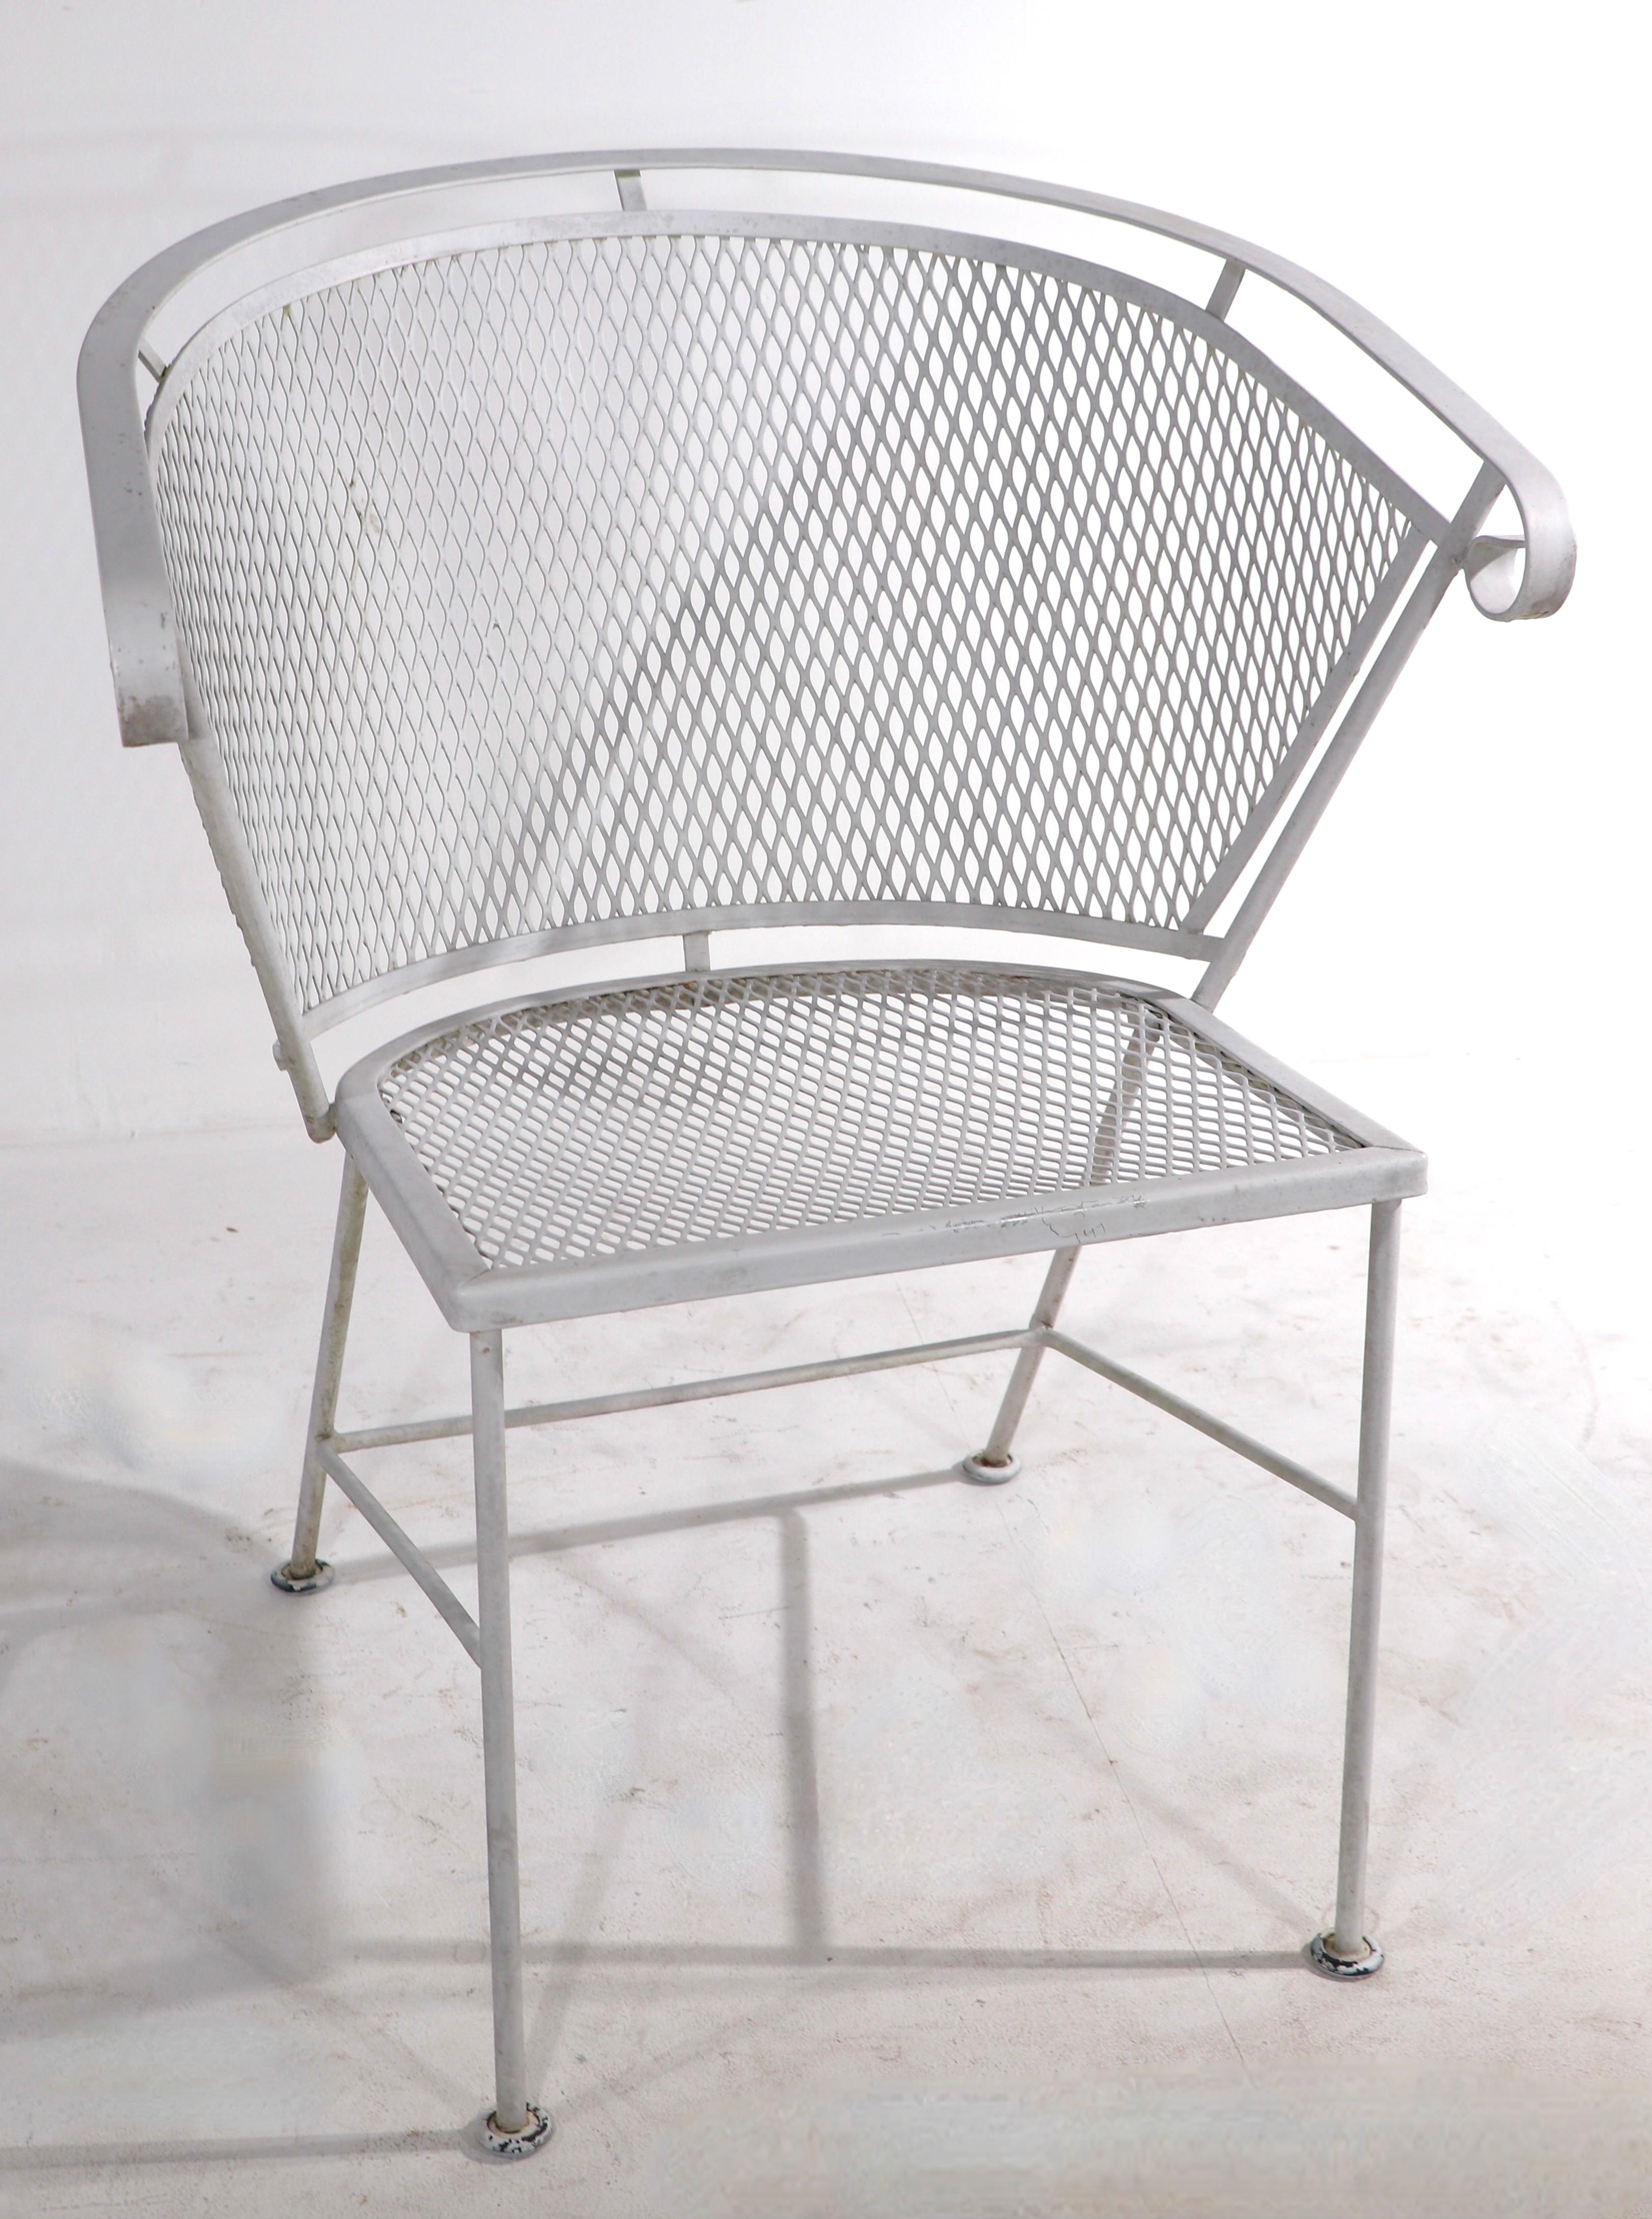 Pair of stylish mid century garden, patio, poolside lounge, dining chairs of wrought iron and metal mesh. Both chairs are in very good condition, showing only light cosmetic wear, normal and consistent with age. Usable as is or we offer custom